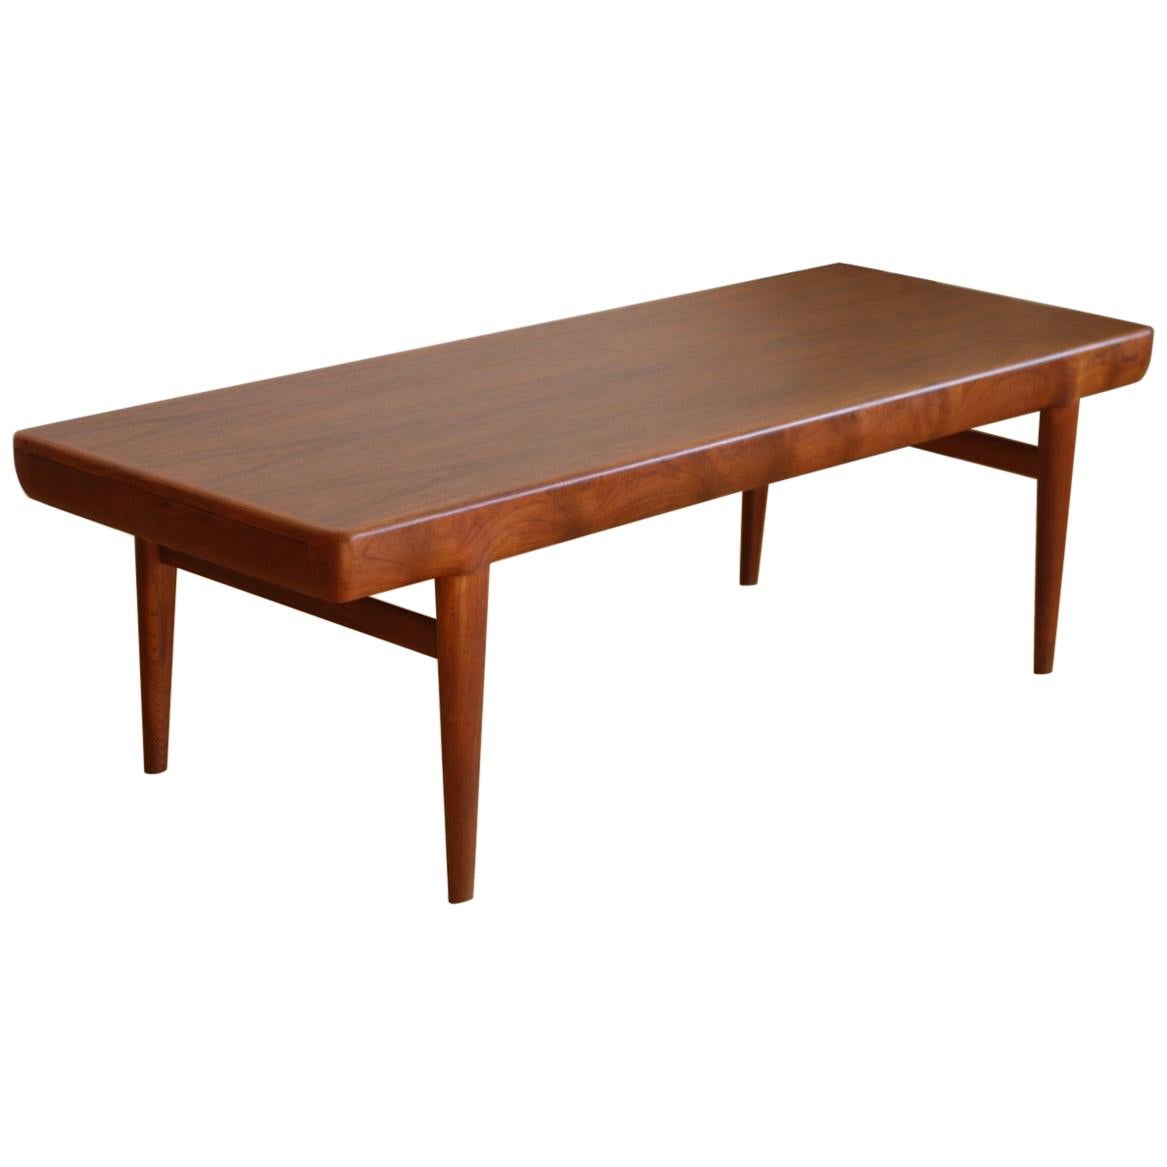 Danish Mid-Century Modern Coffee Table by J. Linde for CFC